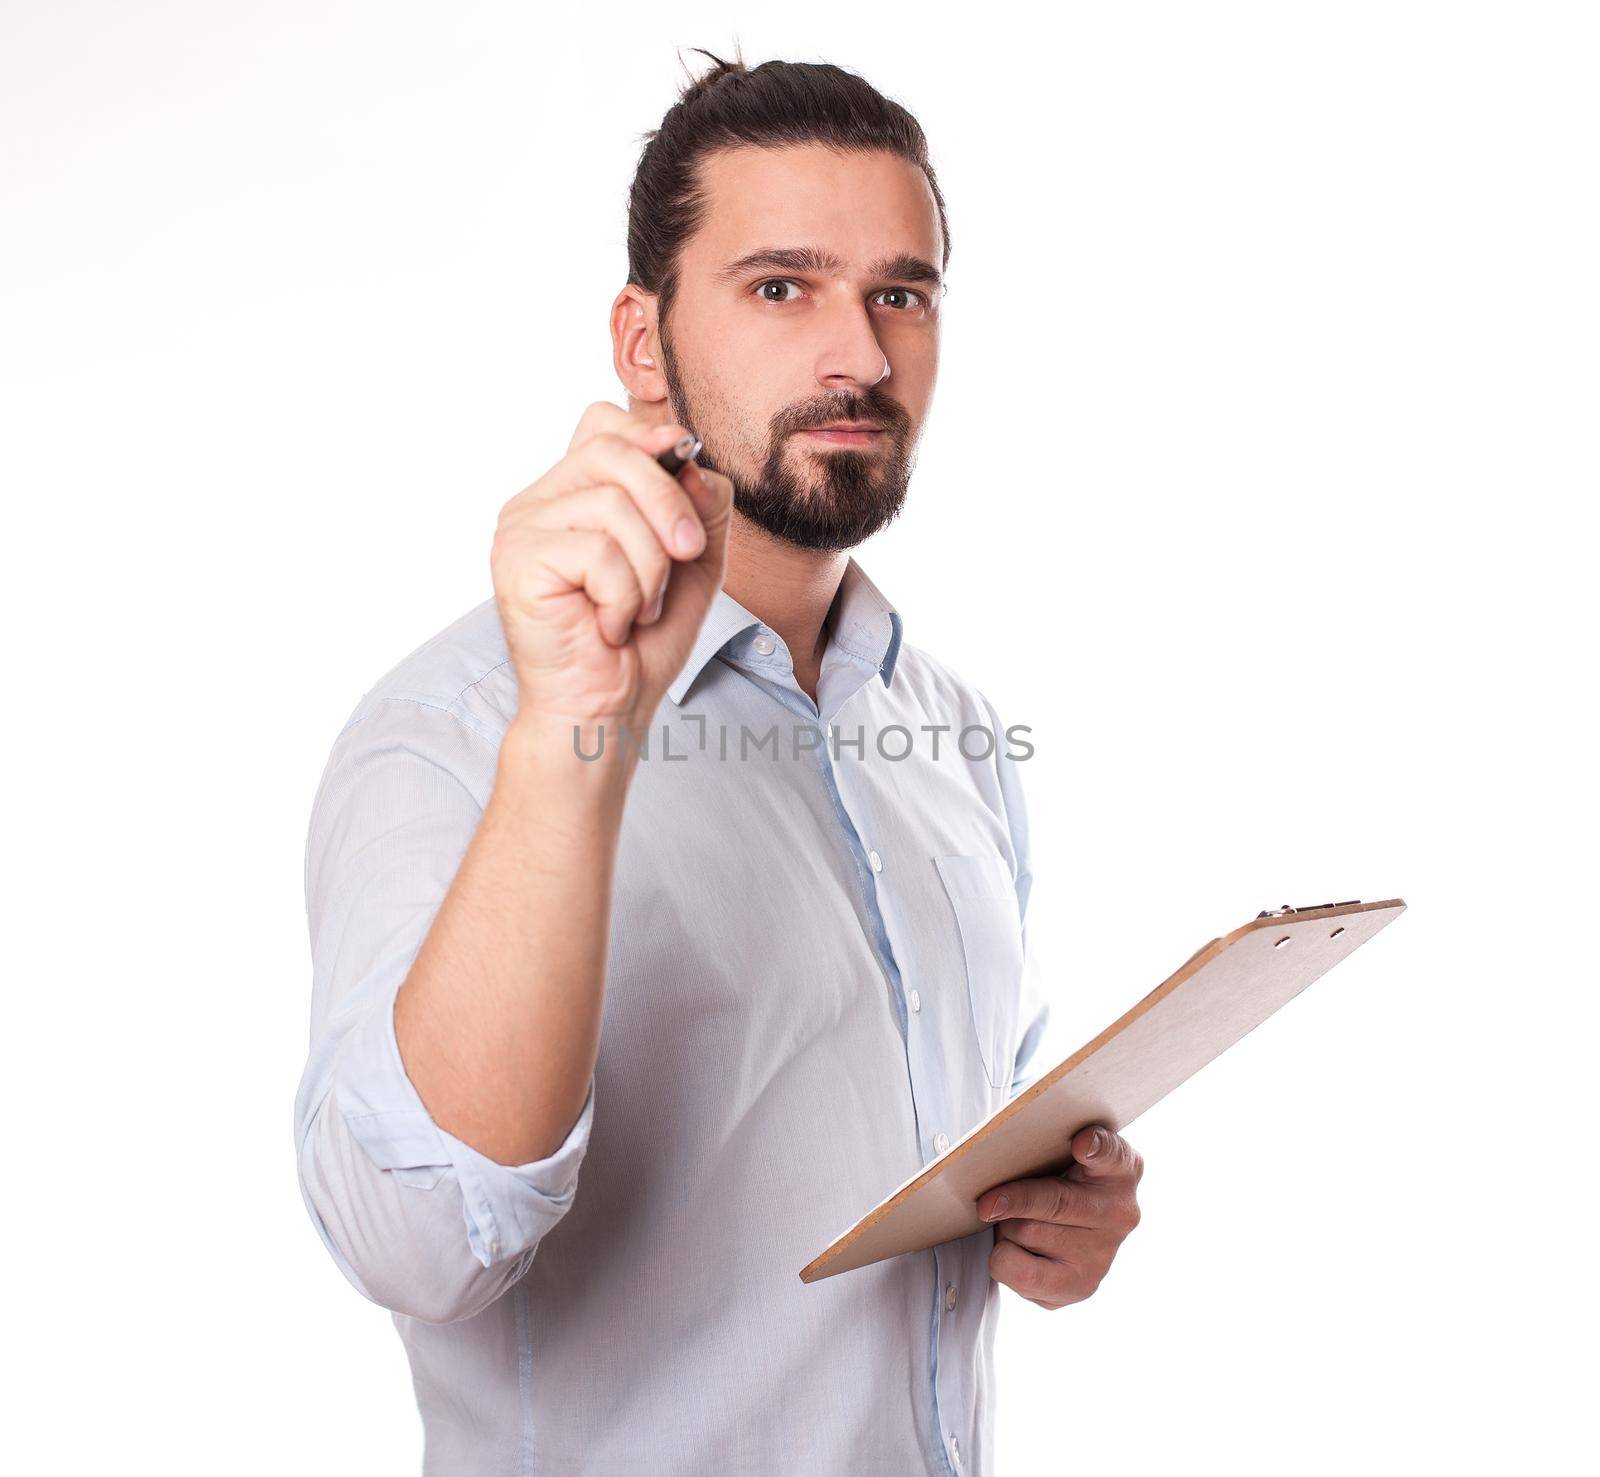 Businessman Writing on a Clipboard, Isolated. Young Man with Hair Bun. Stock image